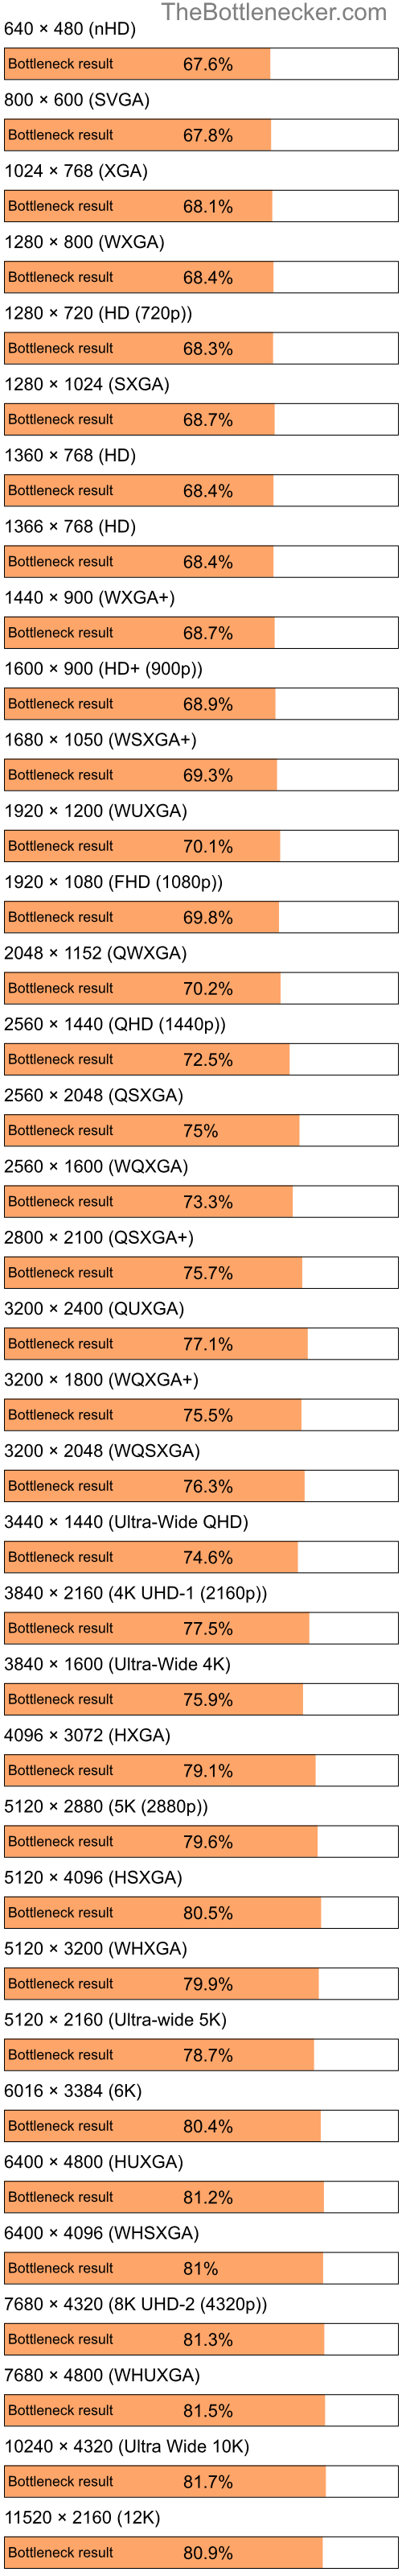 Bottleneck results by resolution for Intel Atom Z520 and NVIDIA GeForce 210 in Graphic Card Intense Tasks